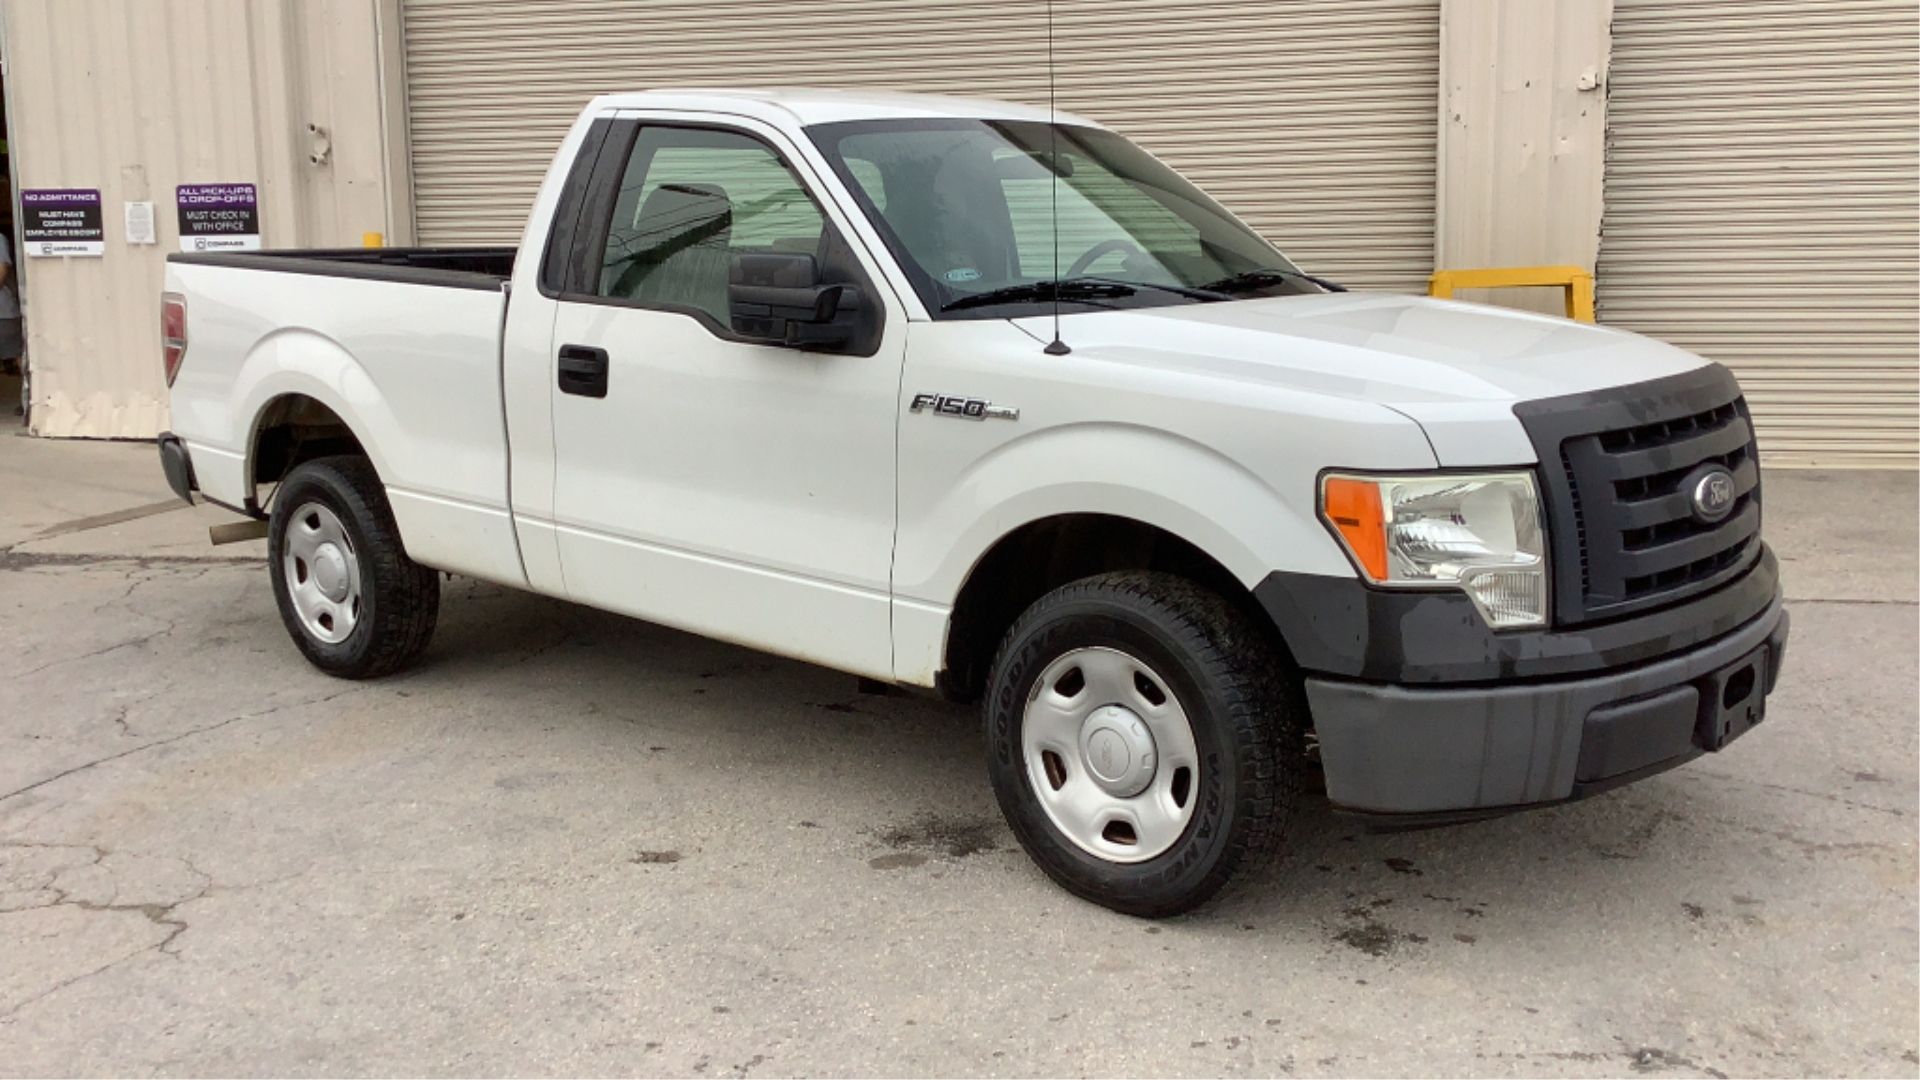 2009 Ford F-150 Regular Cab XL 2WD - Image 2 of 71